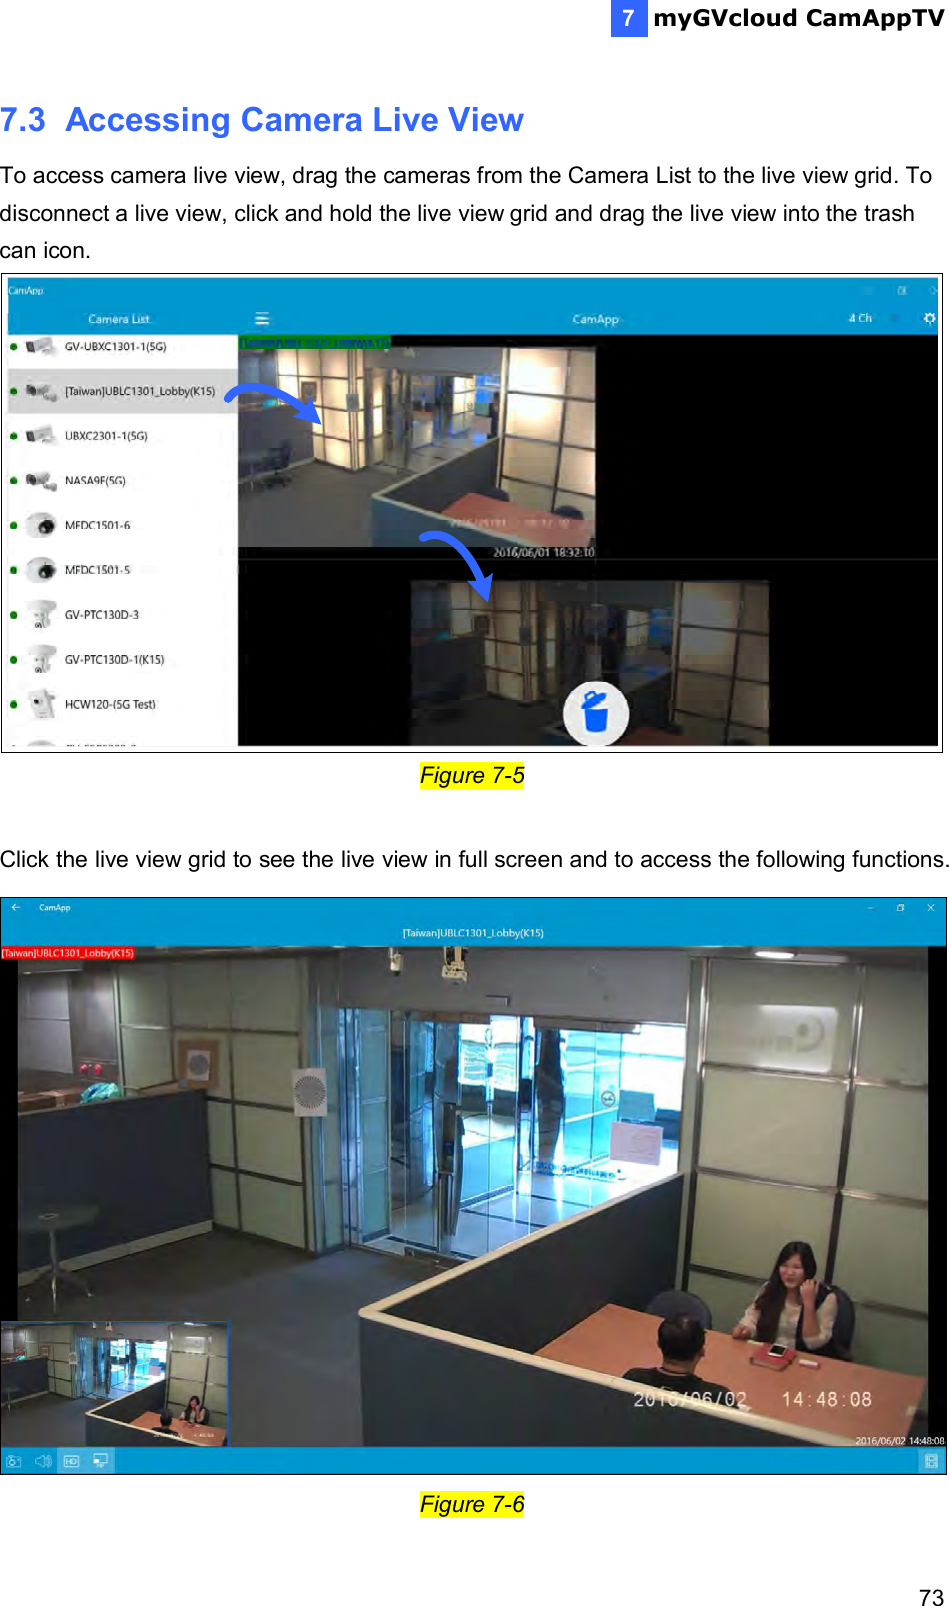  myGVcloud CamAppTV    737 7.3  Accessing Camera Live View To access camera live view, drag the cameras from the Camera List to the live view grid. To disconnect a live view, click and hold the live view grid and drag the live view into the trash can icon. Figure 7-5  Click the live view grid to see the live view in full screen and to access the following functions.  Figure 7-6 